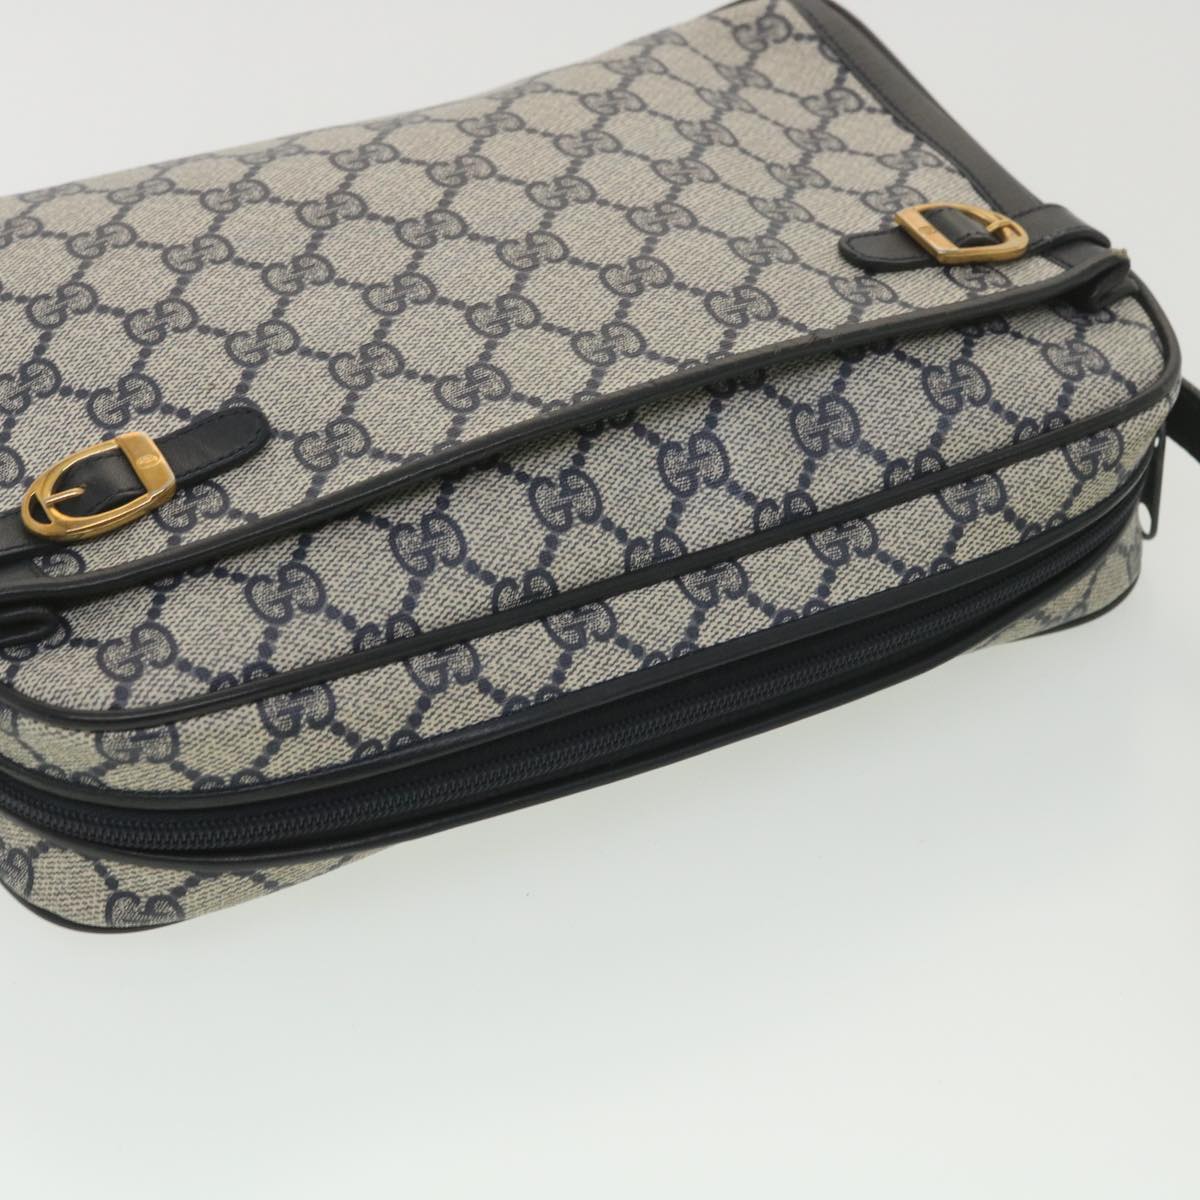 GUCCI GG Canvas Shoulder Bag PVC Leather Gray Navy 001.29.0117 Auth yk6180